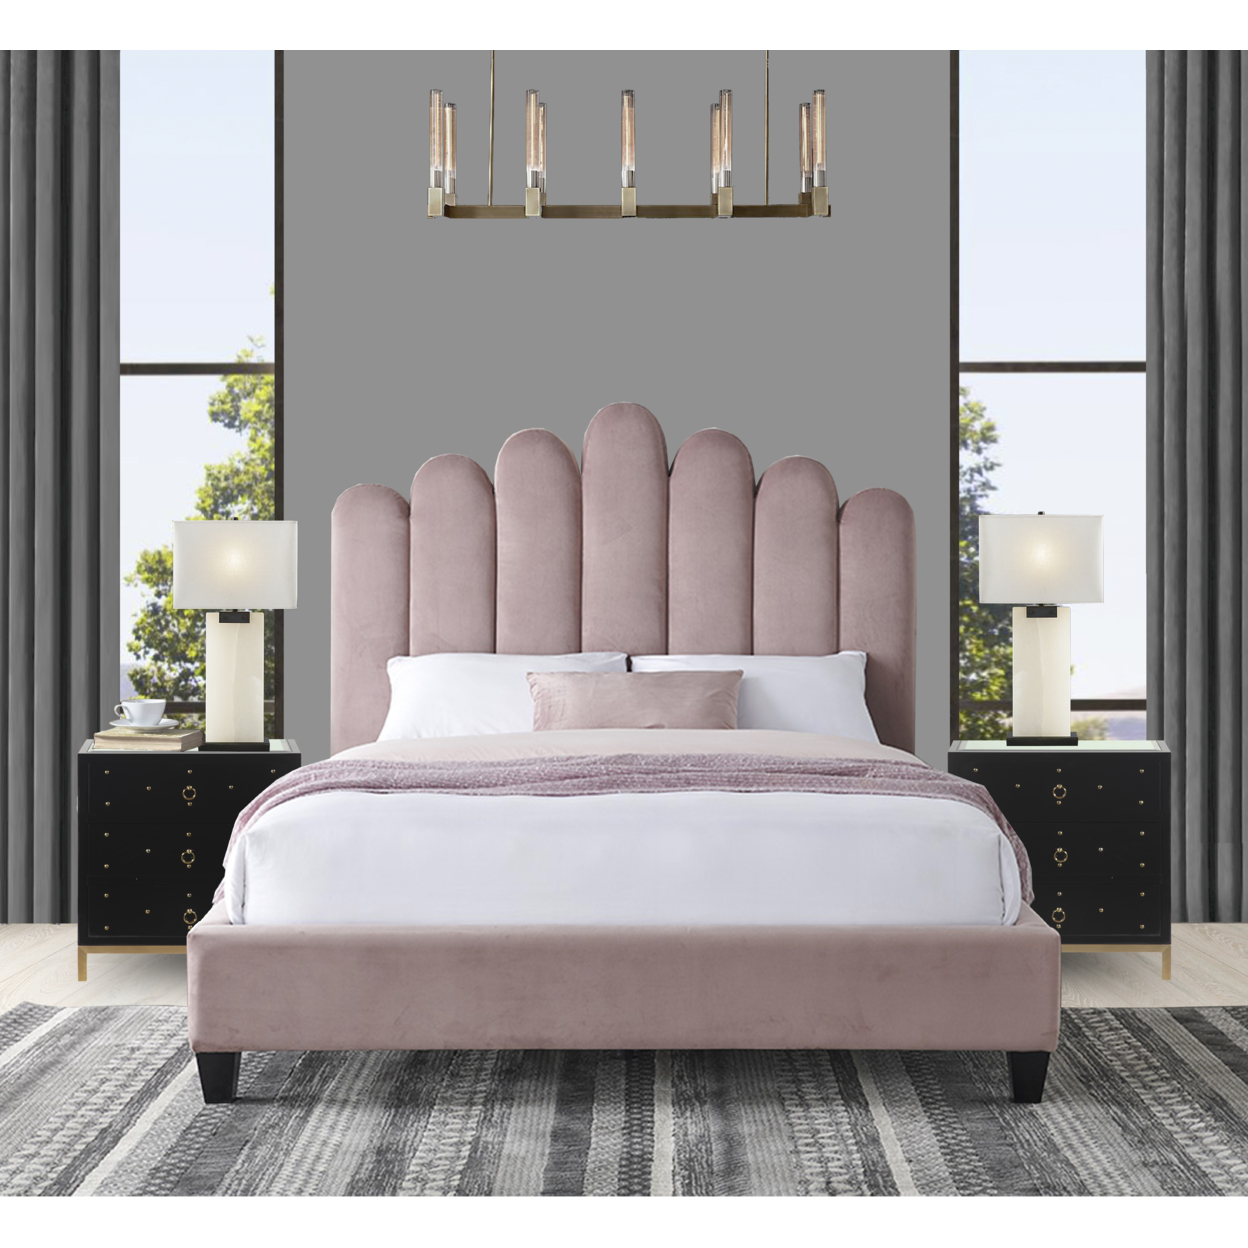 Iconic Home Brynn Platform Bed Frame With Headboard Velvet Upholstered Vertical Channel Quilted - Blush, Queen